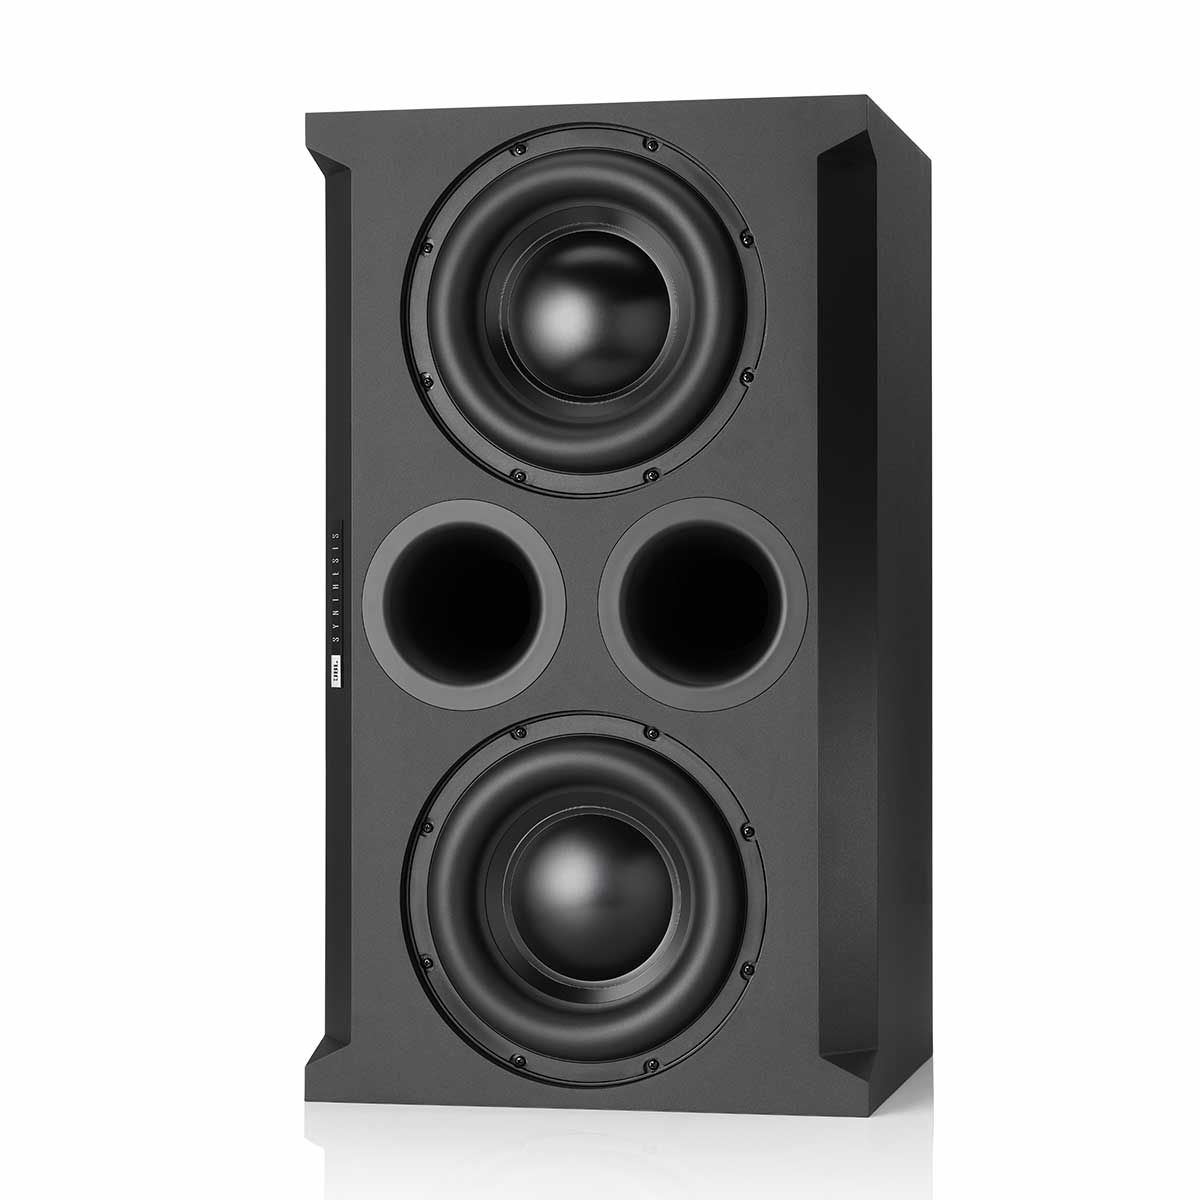 JBL Synthesis SSW-2 Dual Subwoofer, Black, vertical position, front view